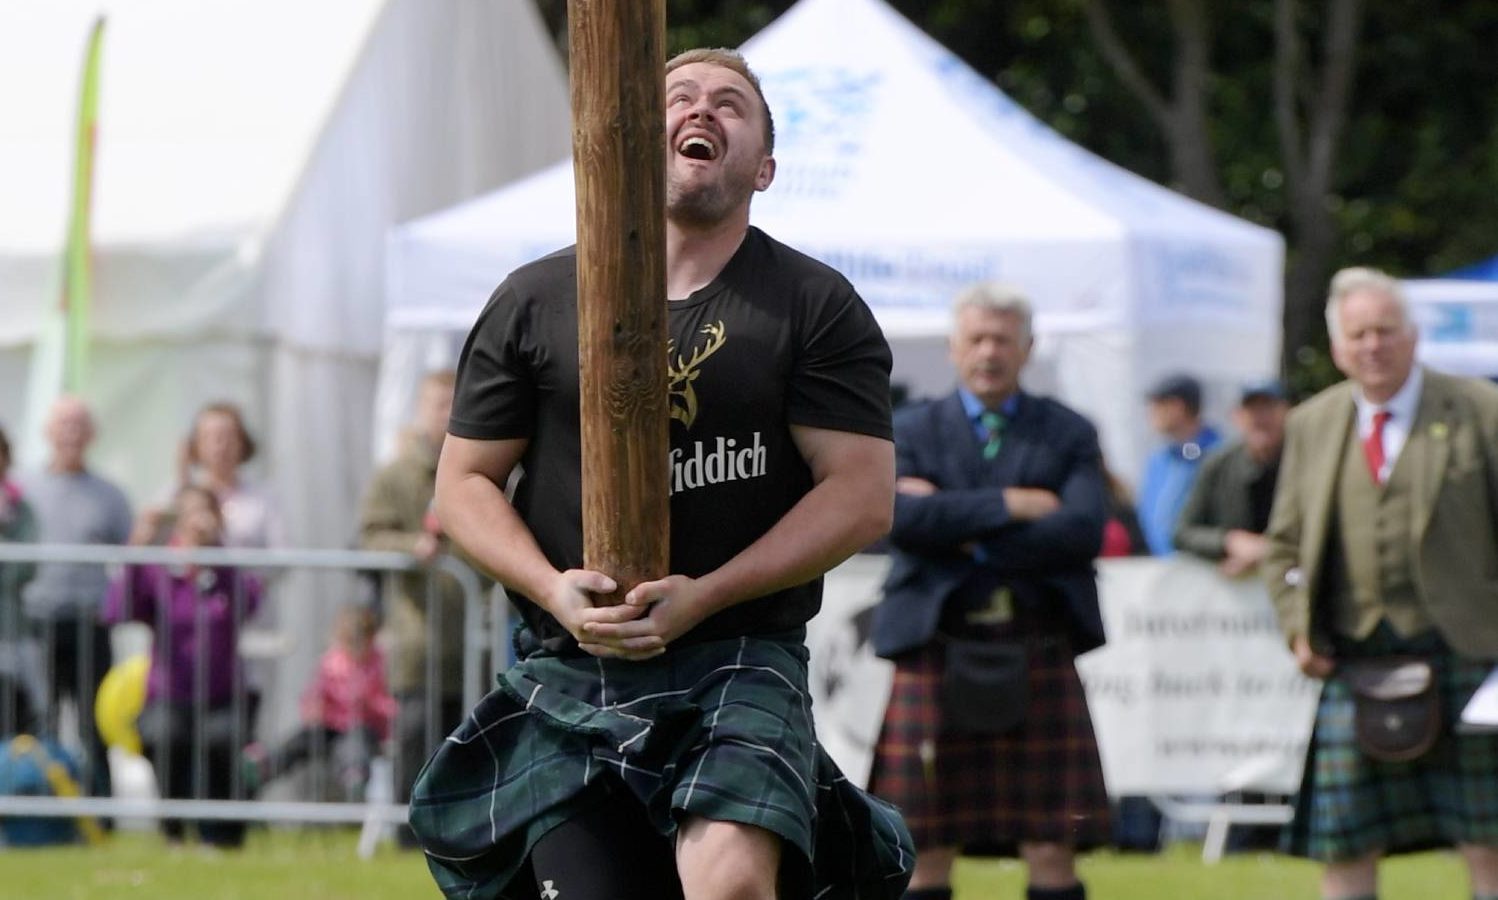 Tossing the Caber at 2019 Aberdeen Highland Games.
Picture by Kath Flannery.